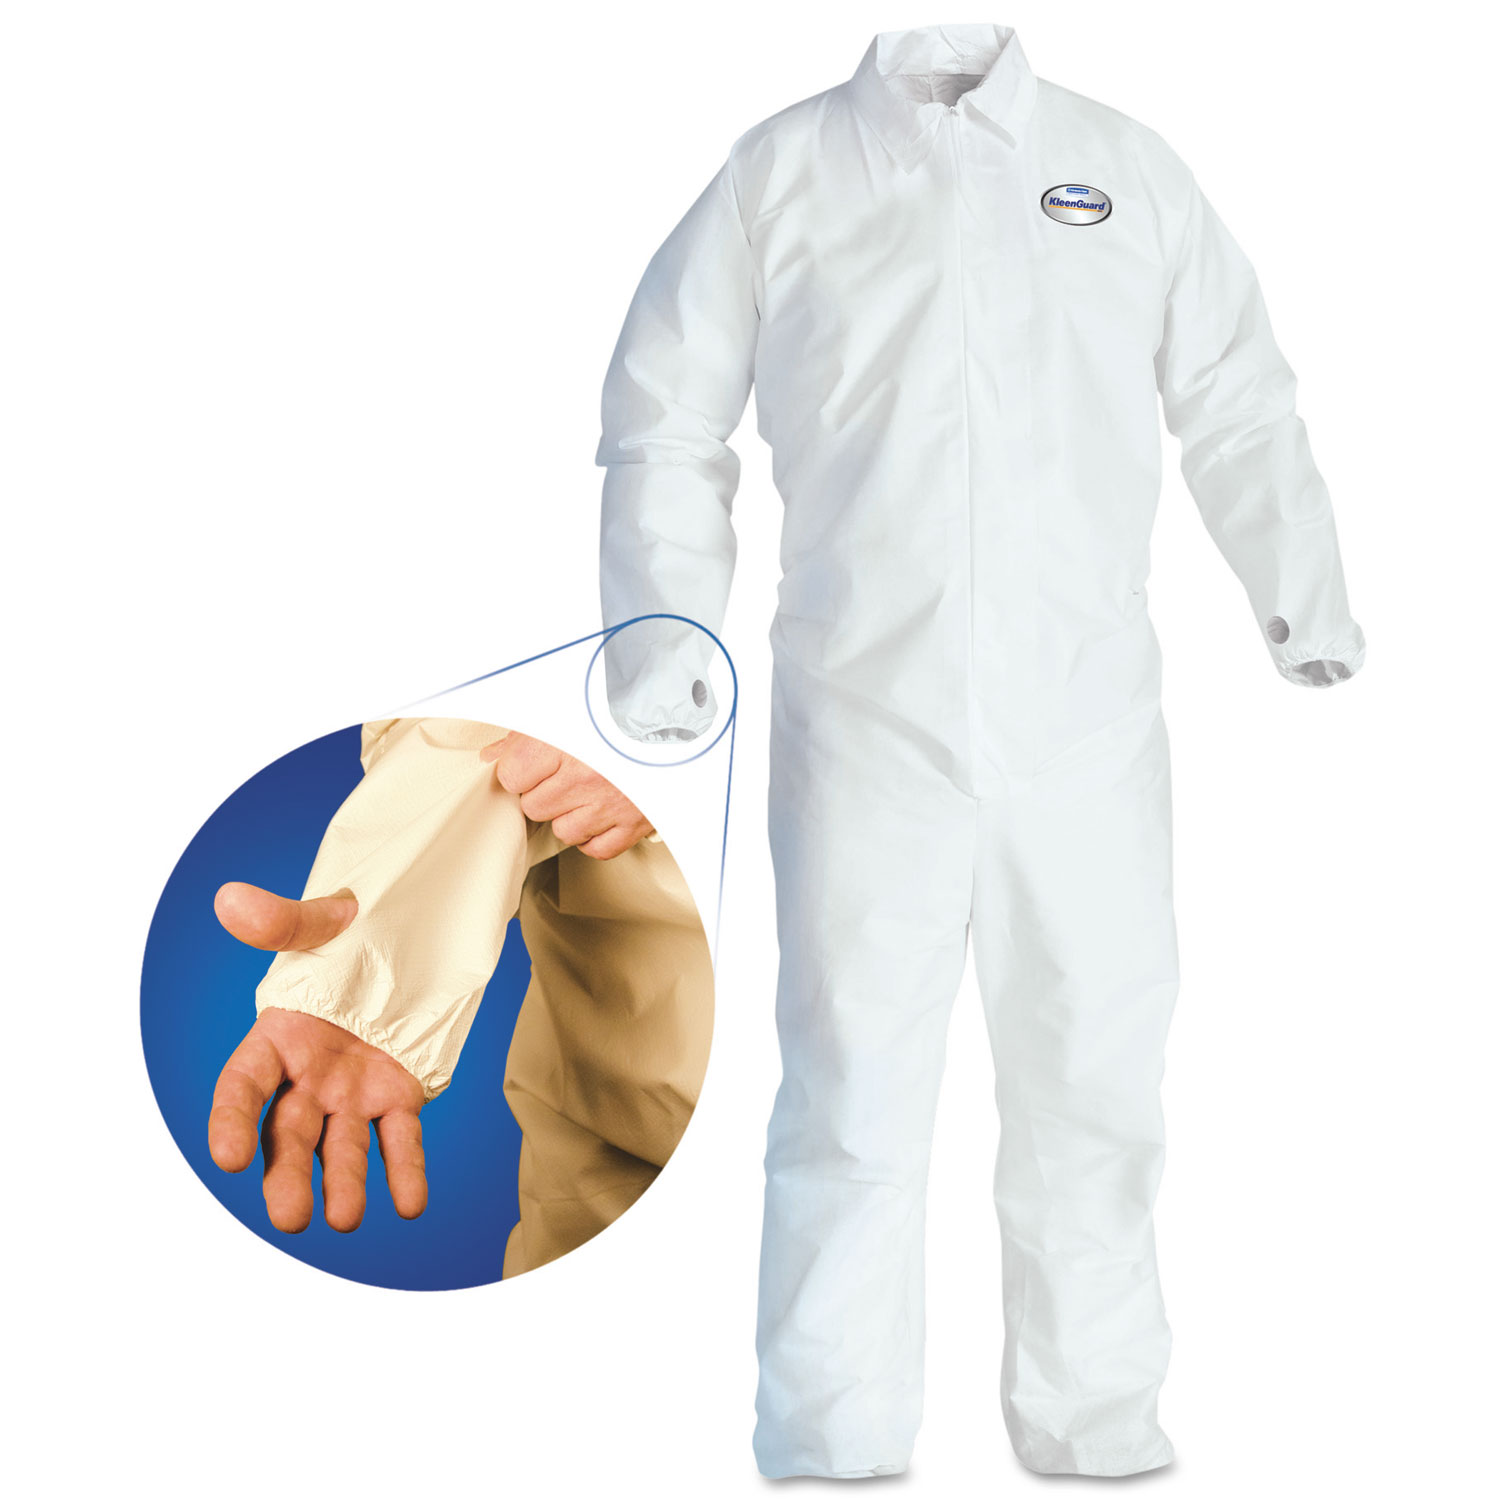 A40 Breathable Back Coverall with Thumb Hole, White/Blue, X-Large, 25/Carton